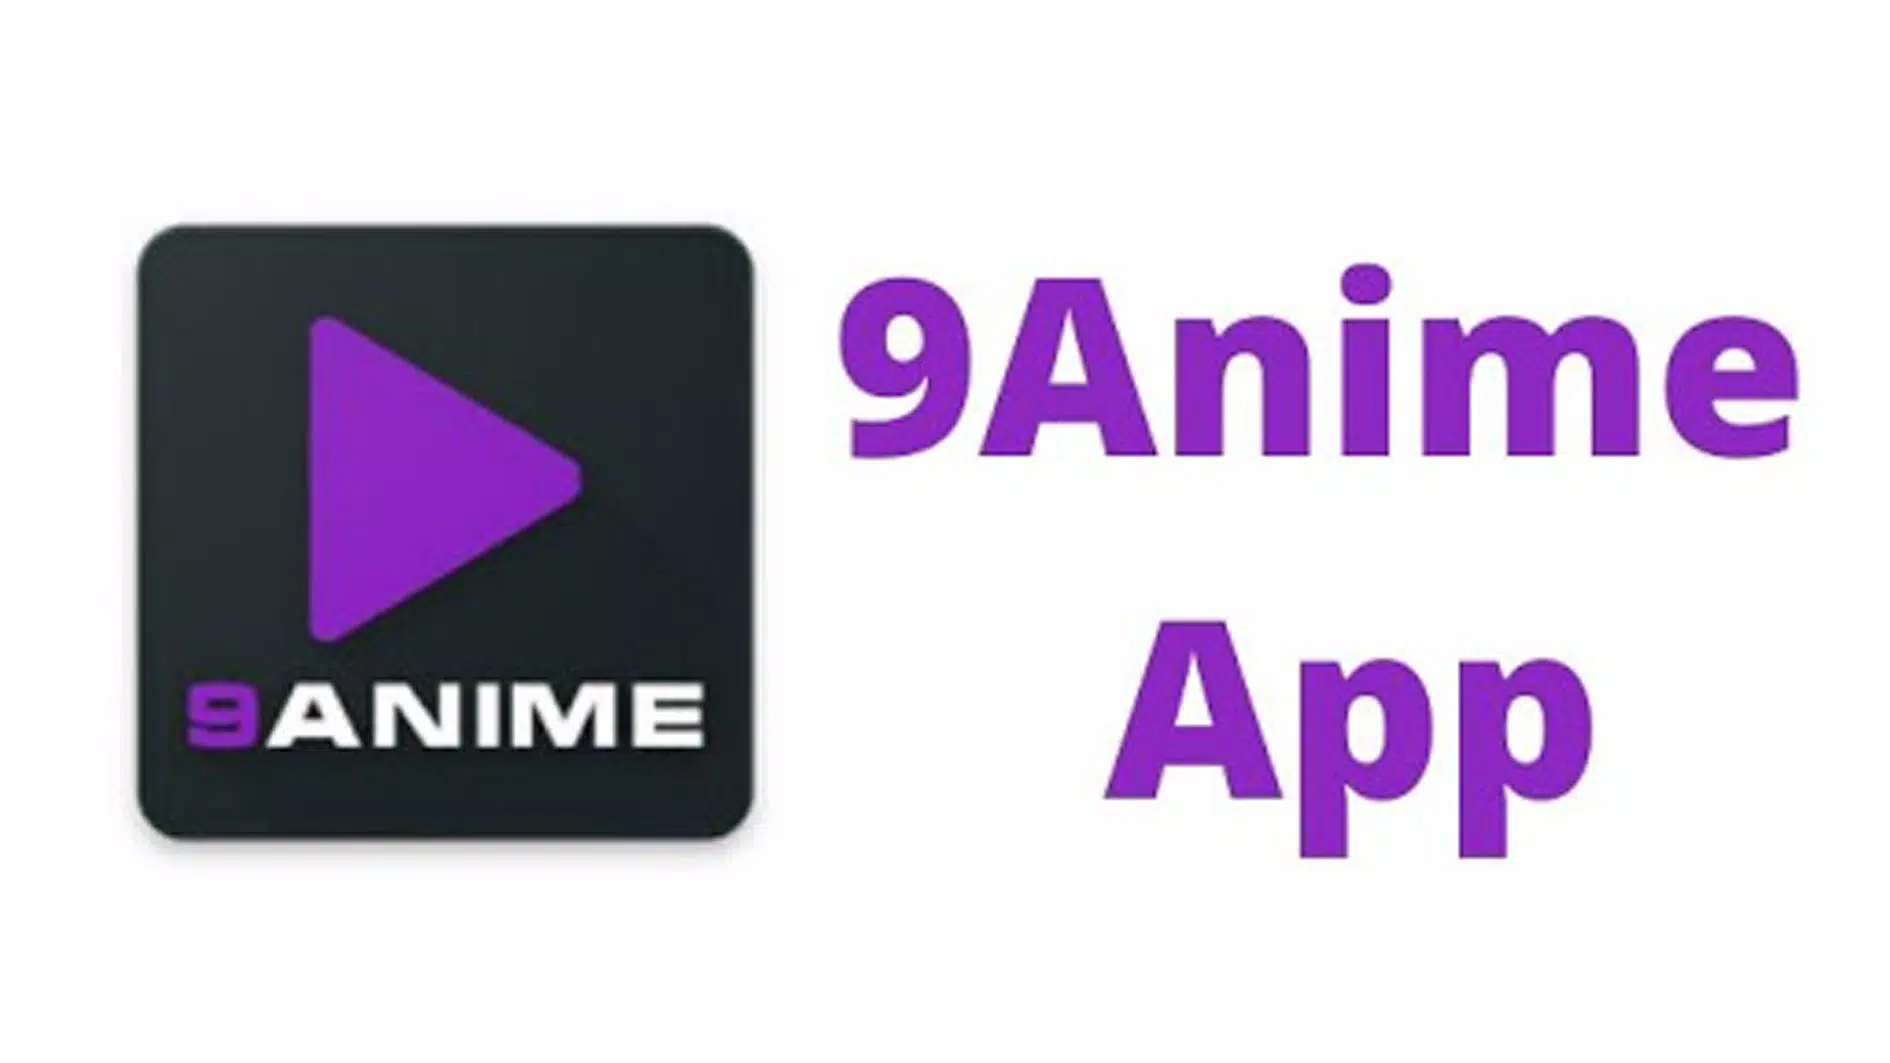 About: 9ANIME (Google Play version)